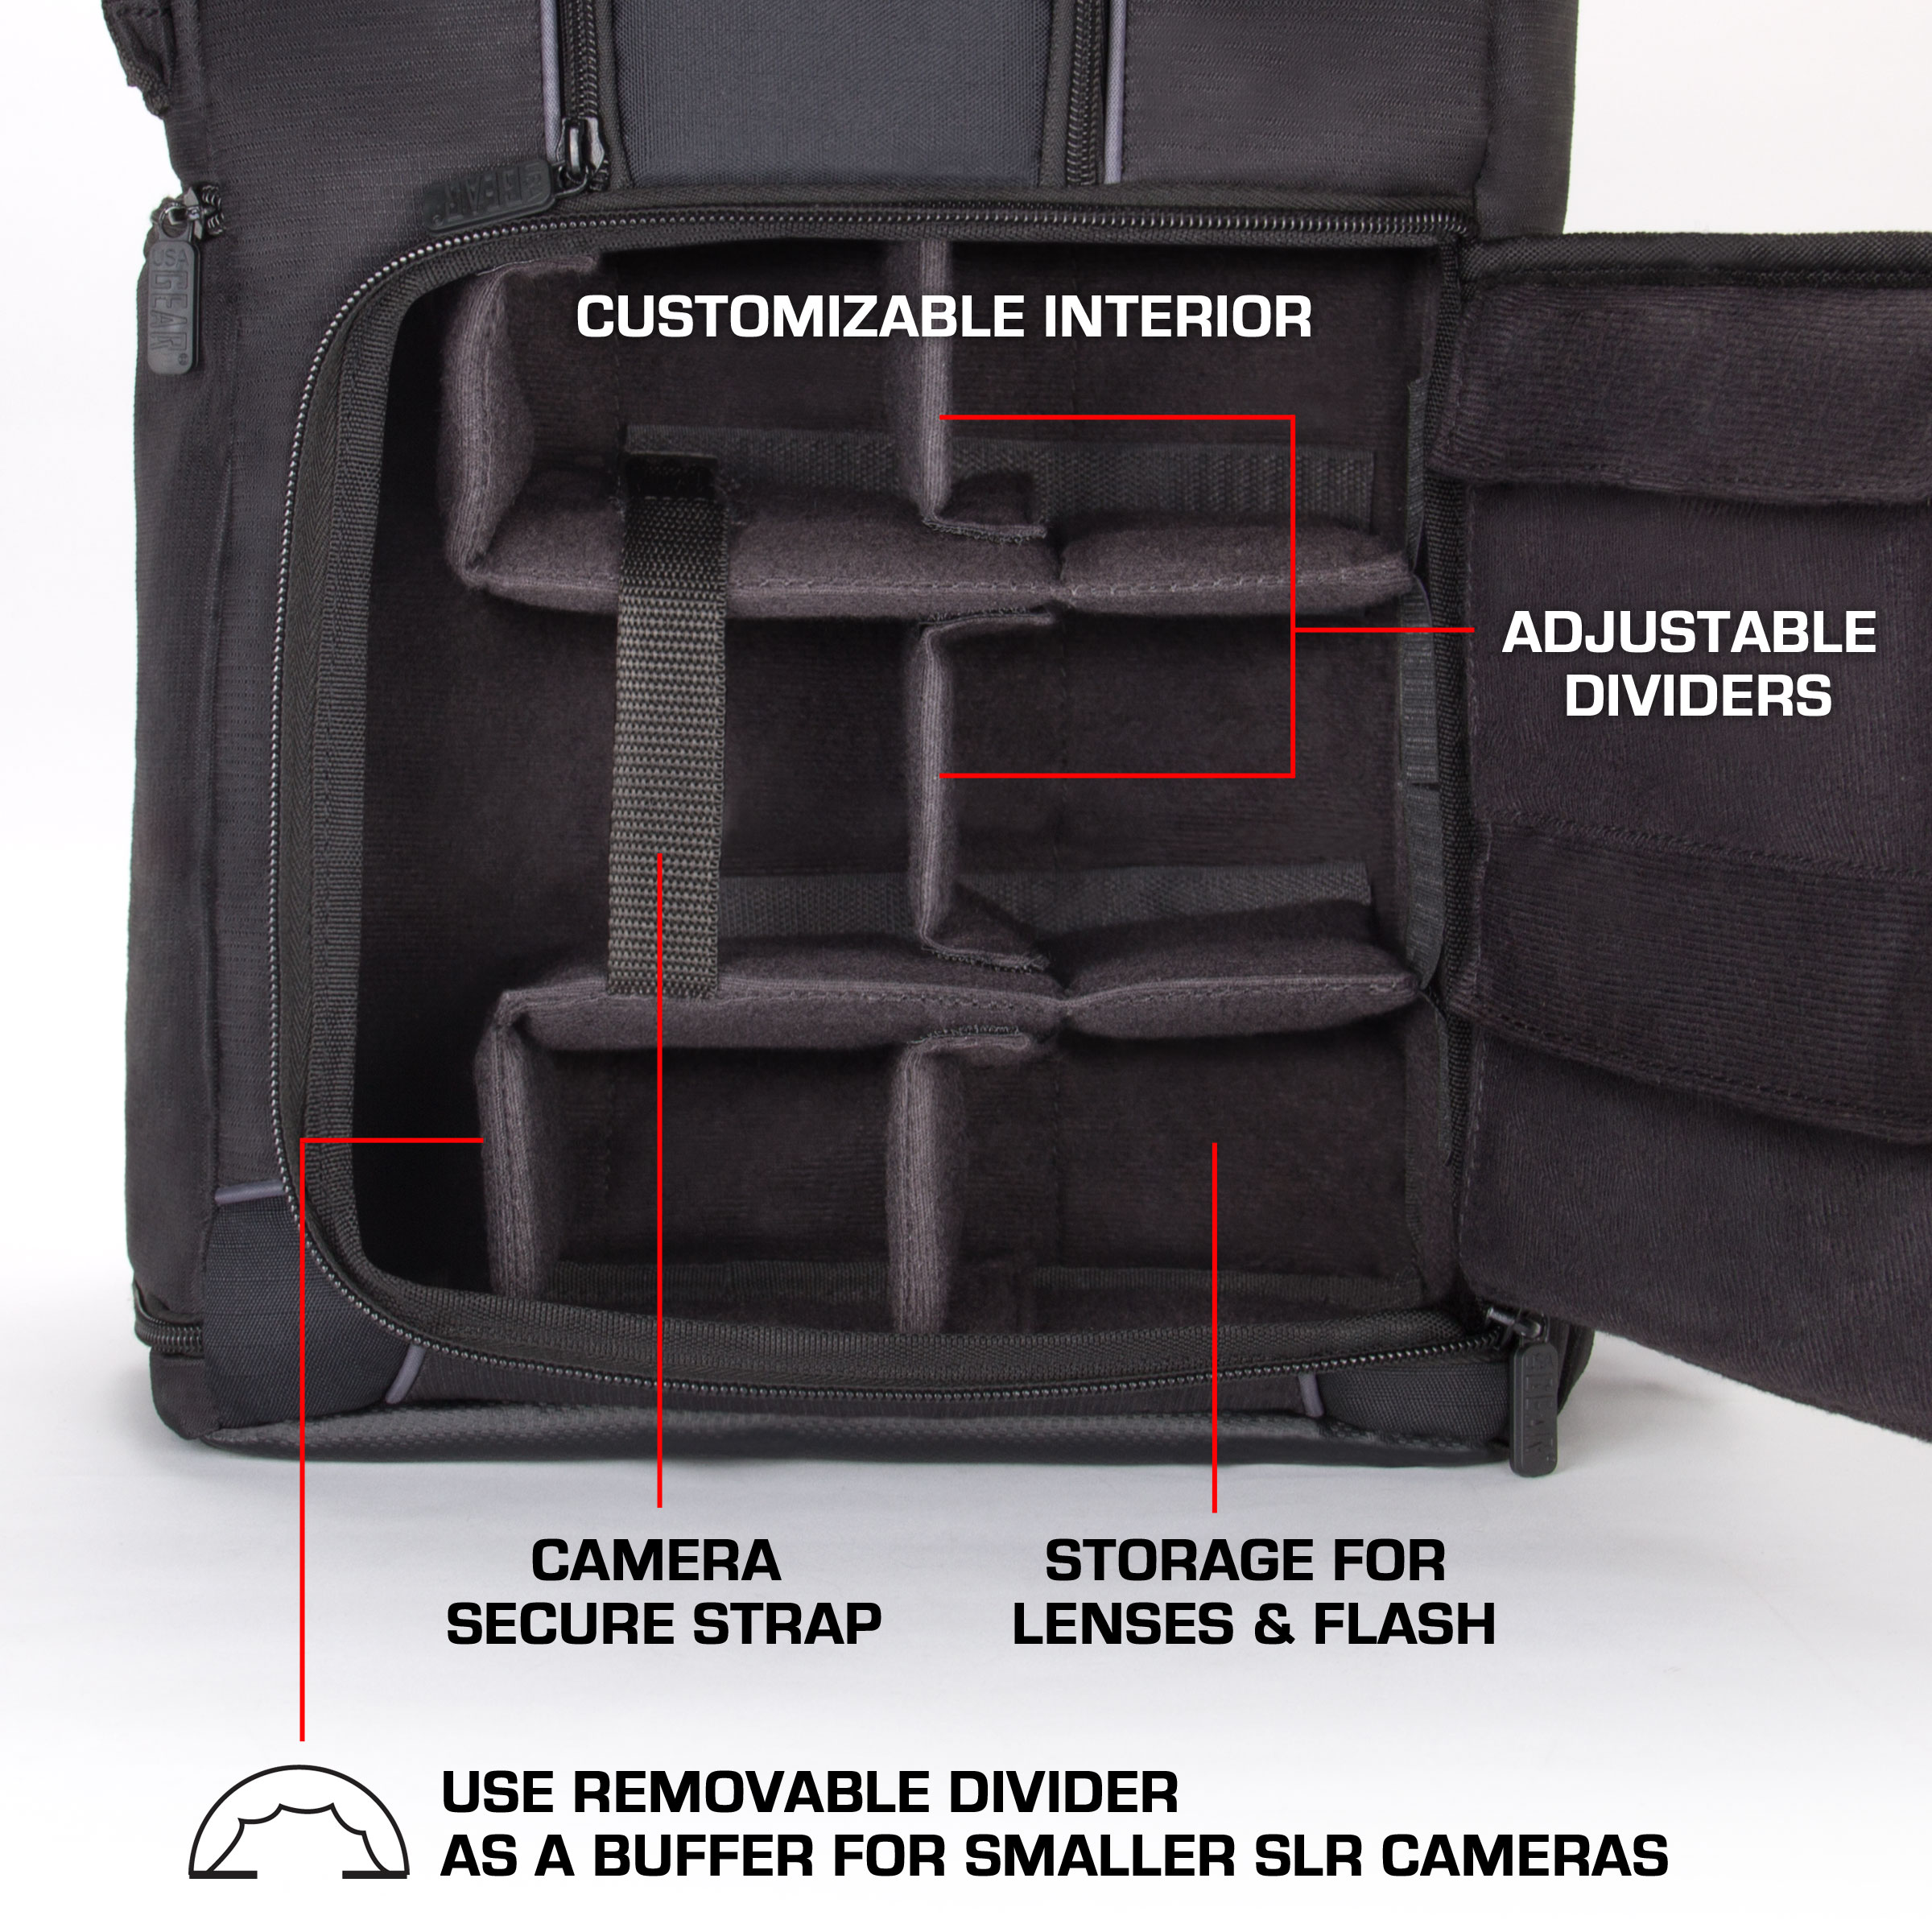 USA Gear Digital SLR Camera Backpack with Laptop Compartment , Rain Cover , Lens Storage for DSLR - image 4 of 9